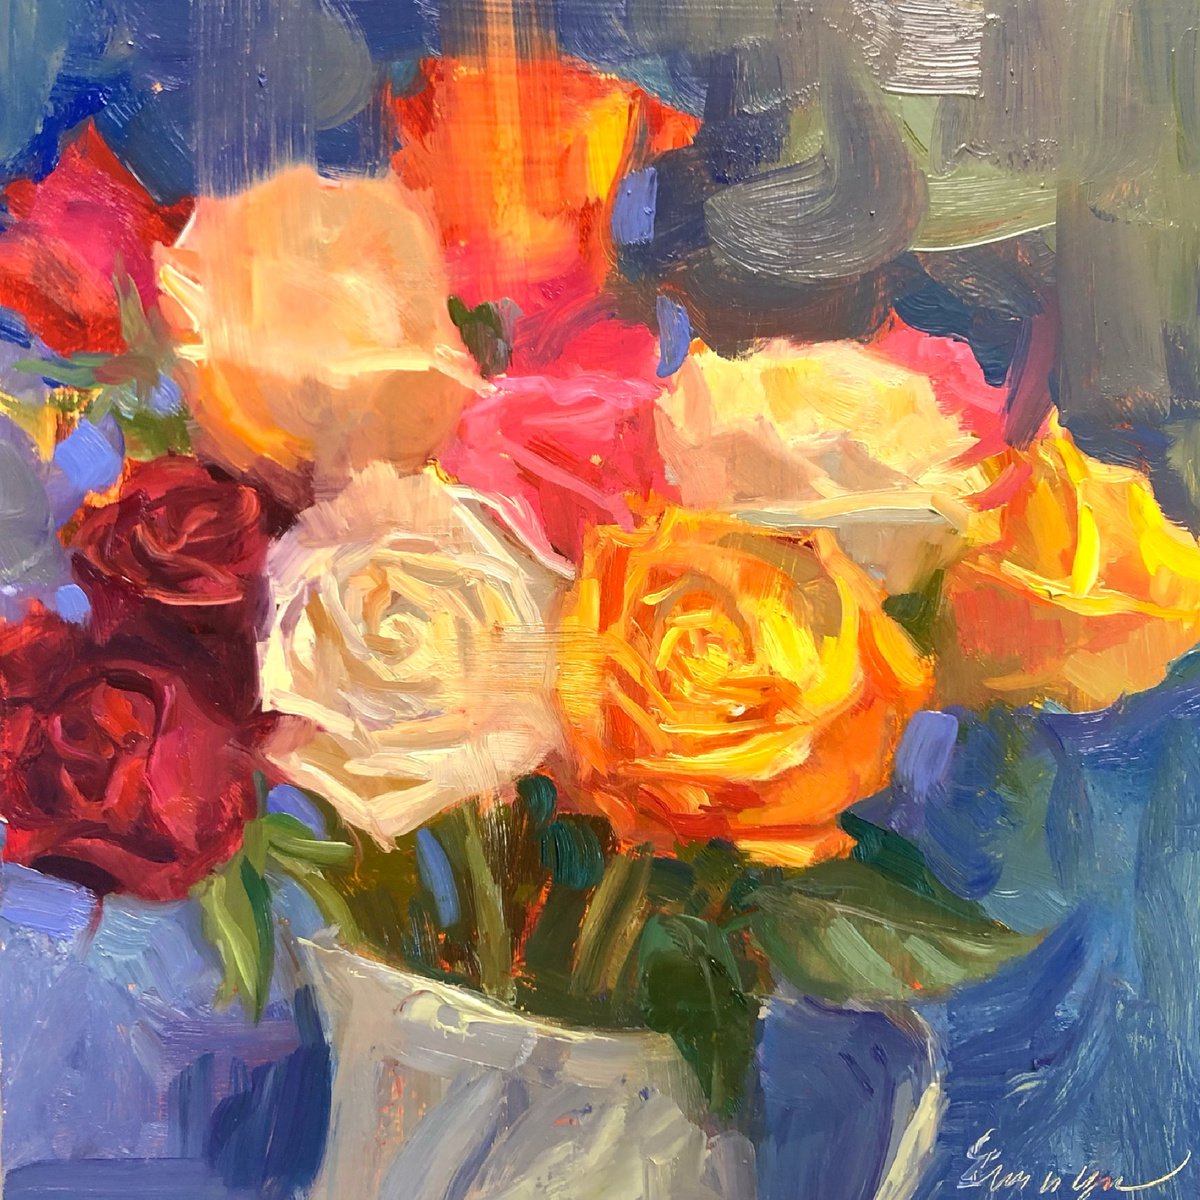 Colorful Roses Painting Vivid Flowers Original Still Life Oil On Board Impressionism Artwo... by Emiliya Lane